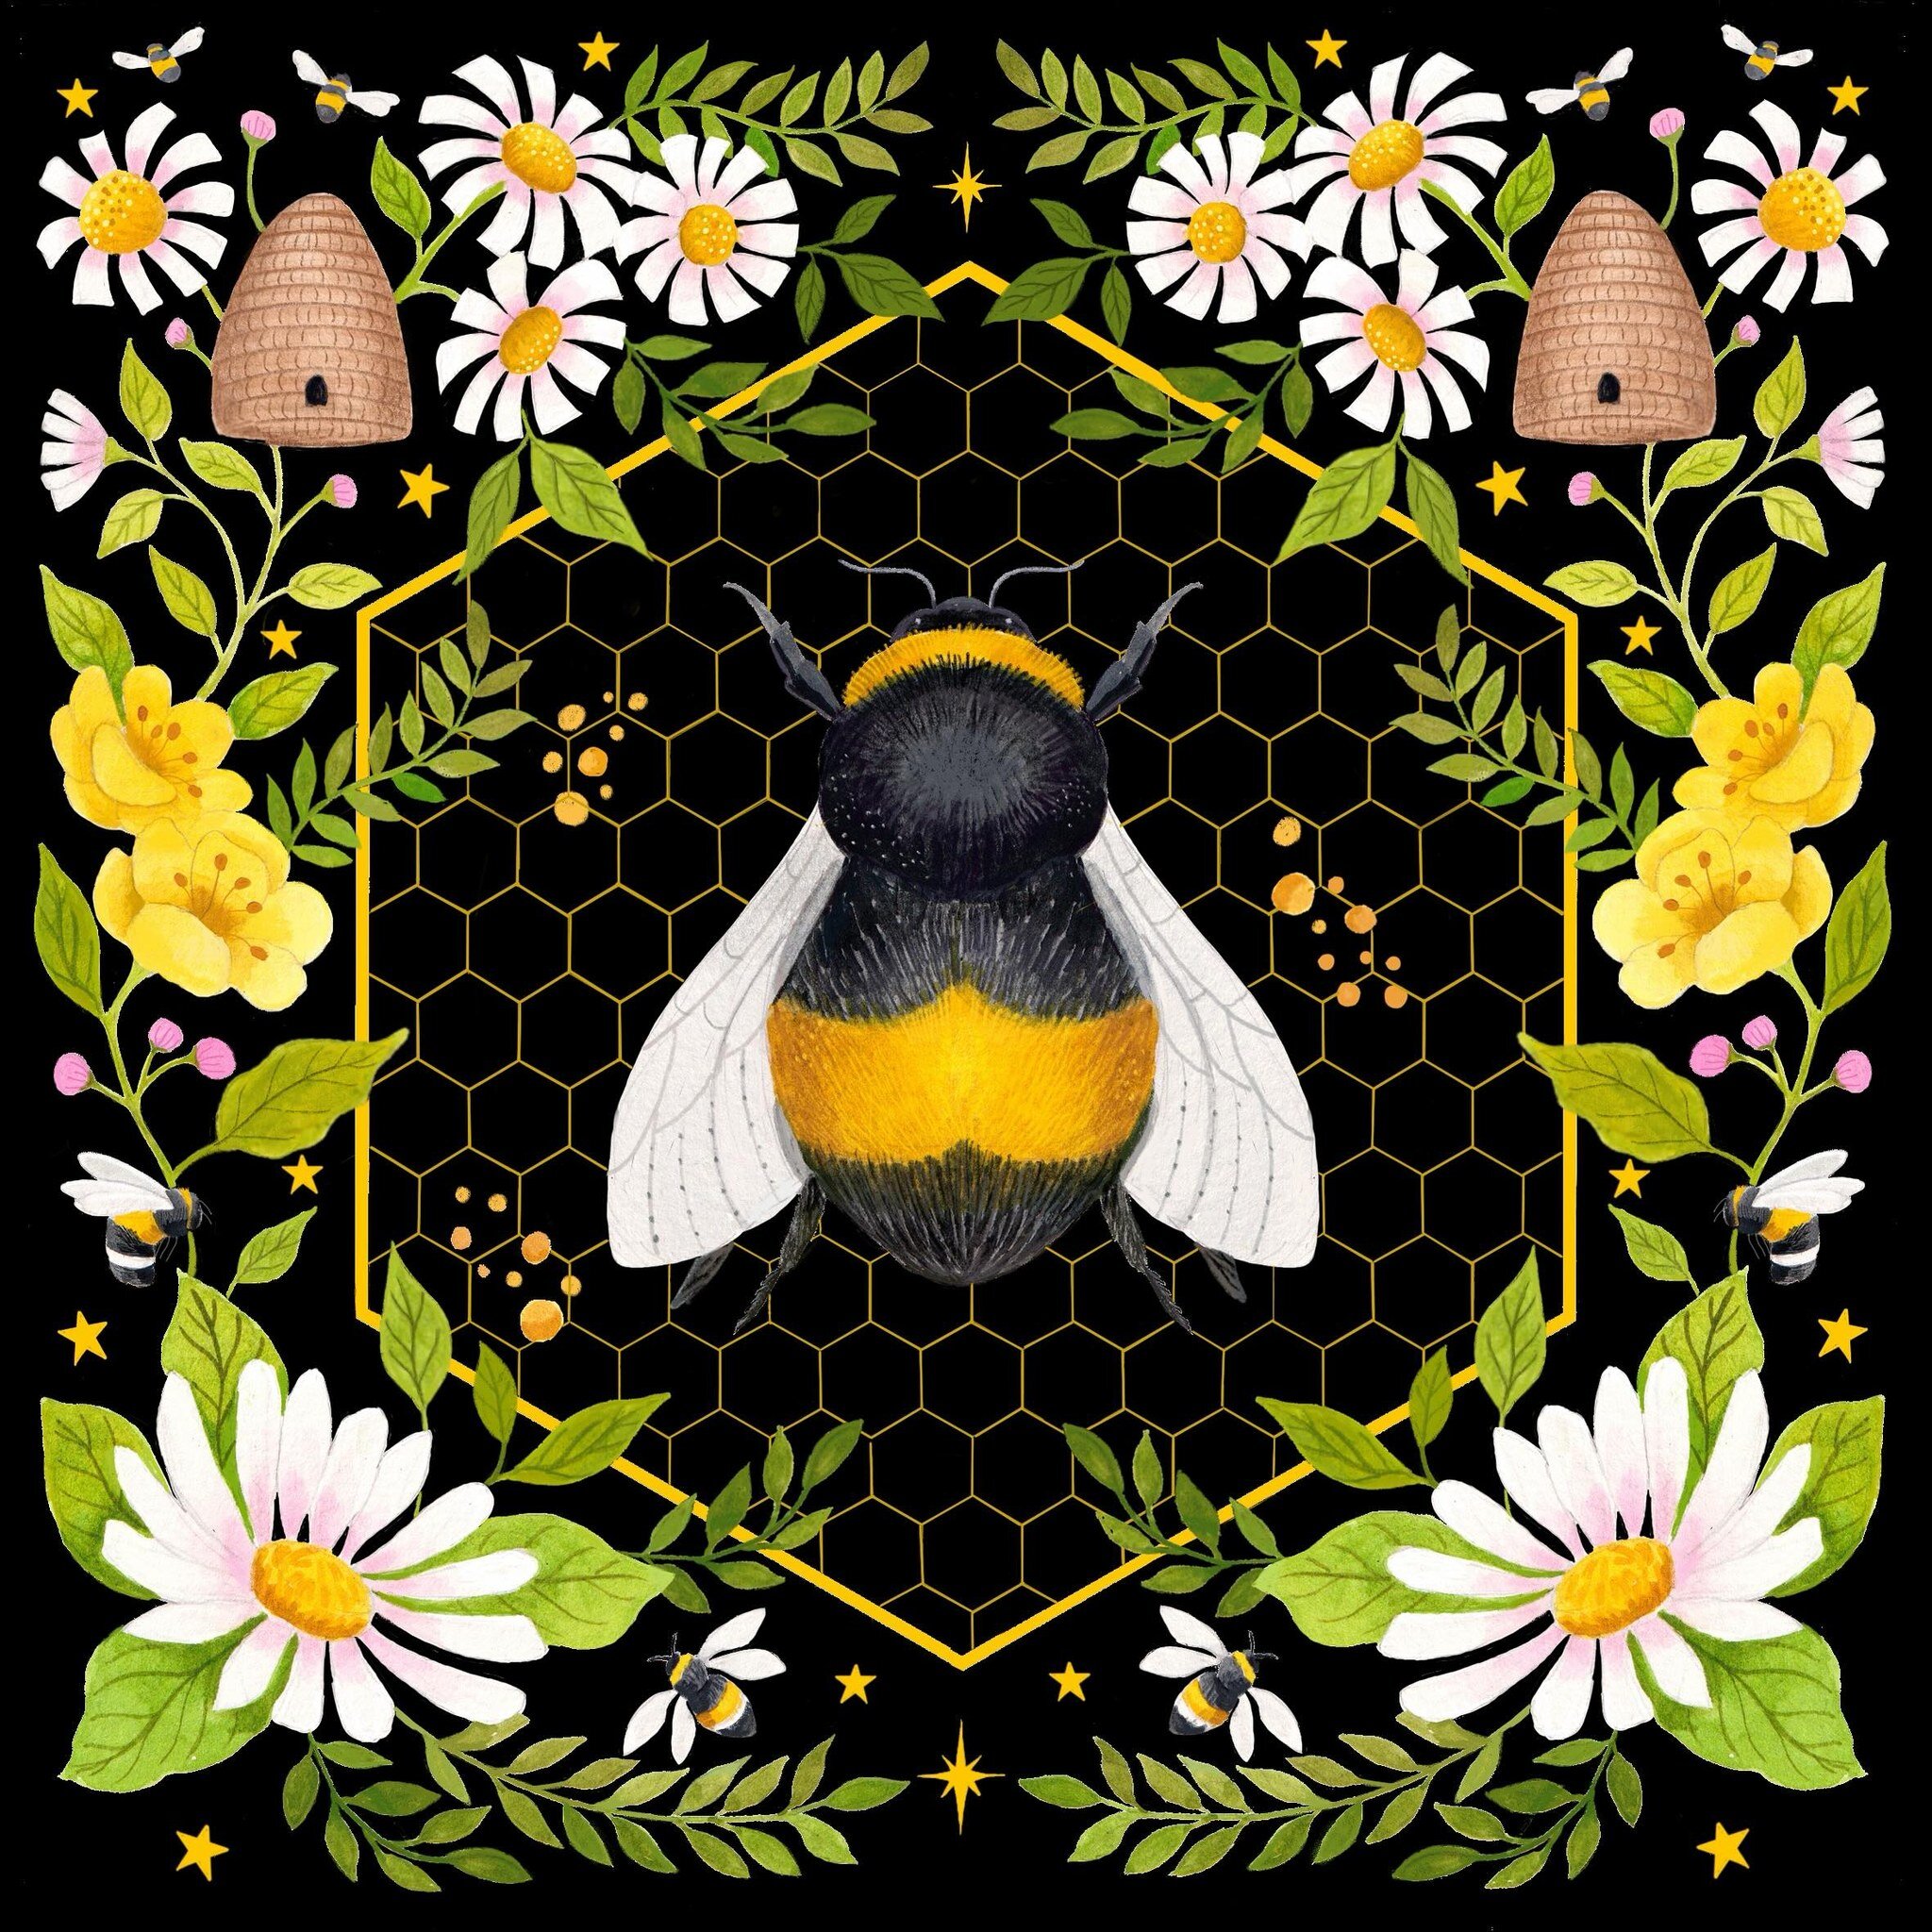 Since I started illustrating , I&rsquo;ve always meant to paint a bee but never got round to it - till yesterday ! 🐝 There may or may not be more in the future 😆

#illustration #illustrator #artlicensing #bee #greetingcards #jigsawpuzzle #wildlifea